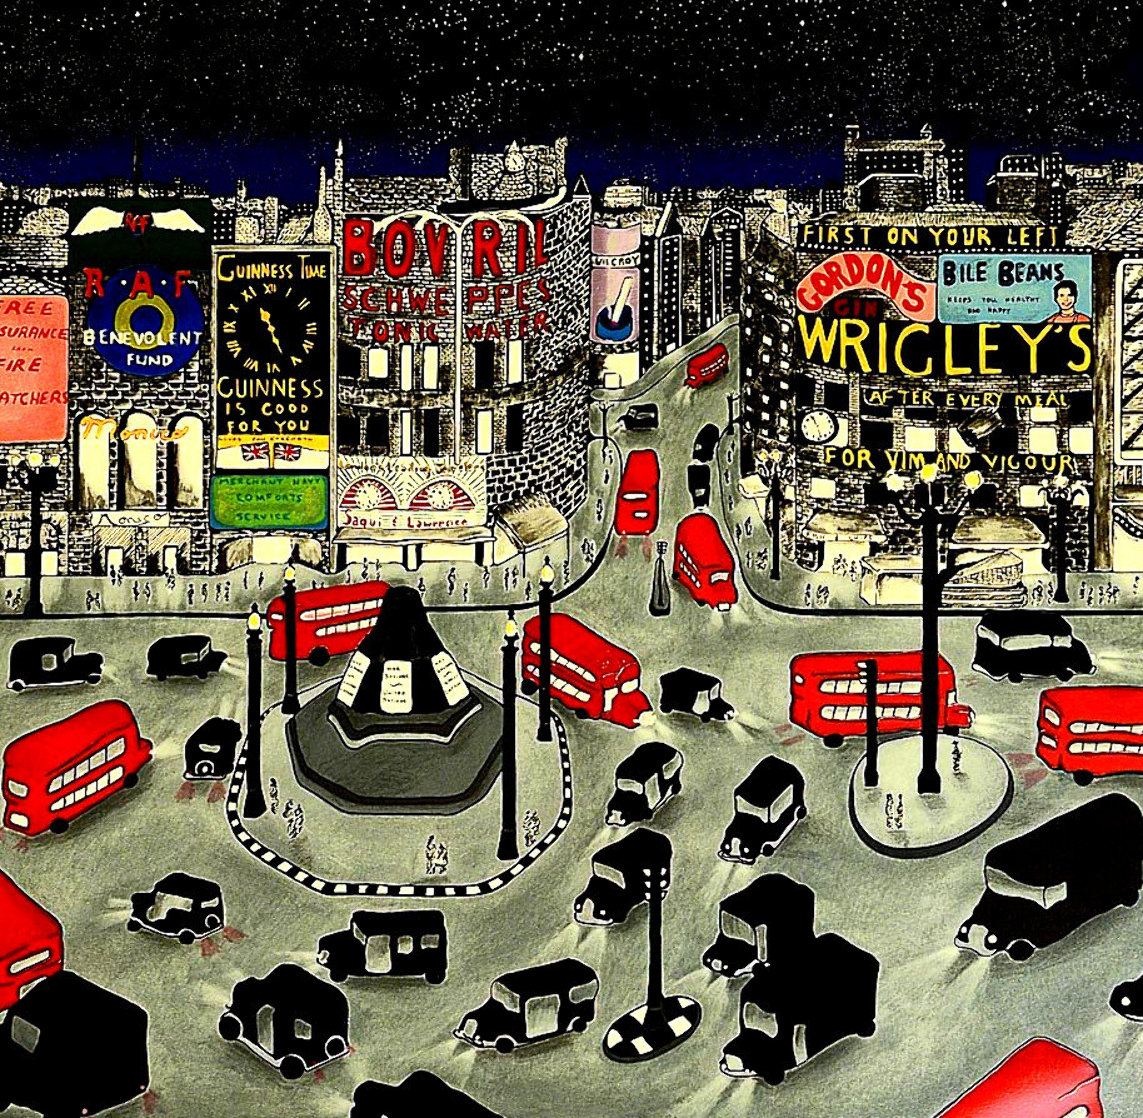 London 1943 Piccadilly Circus  PP 1990 Limited Edition Print by Linnea Pergola